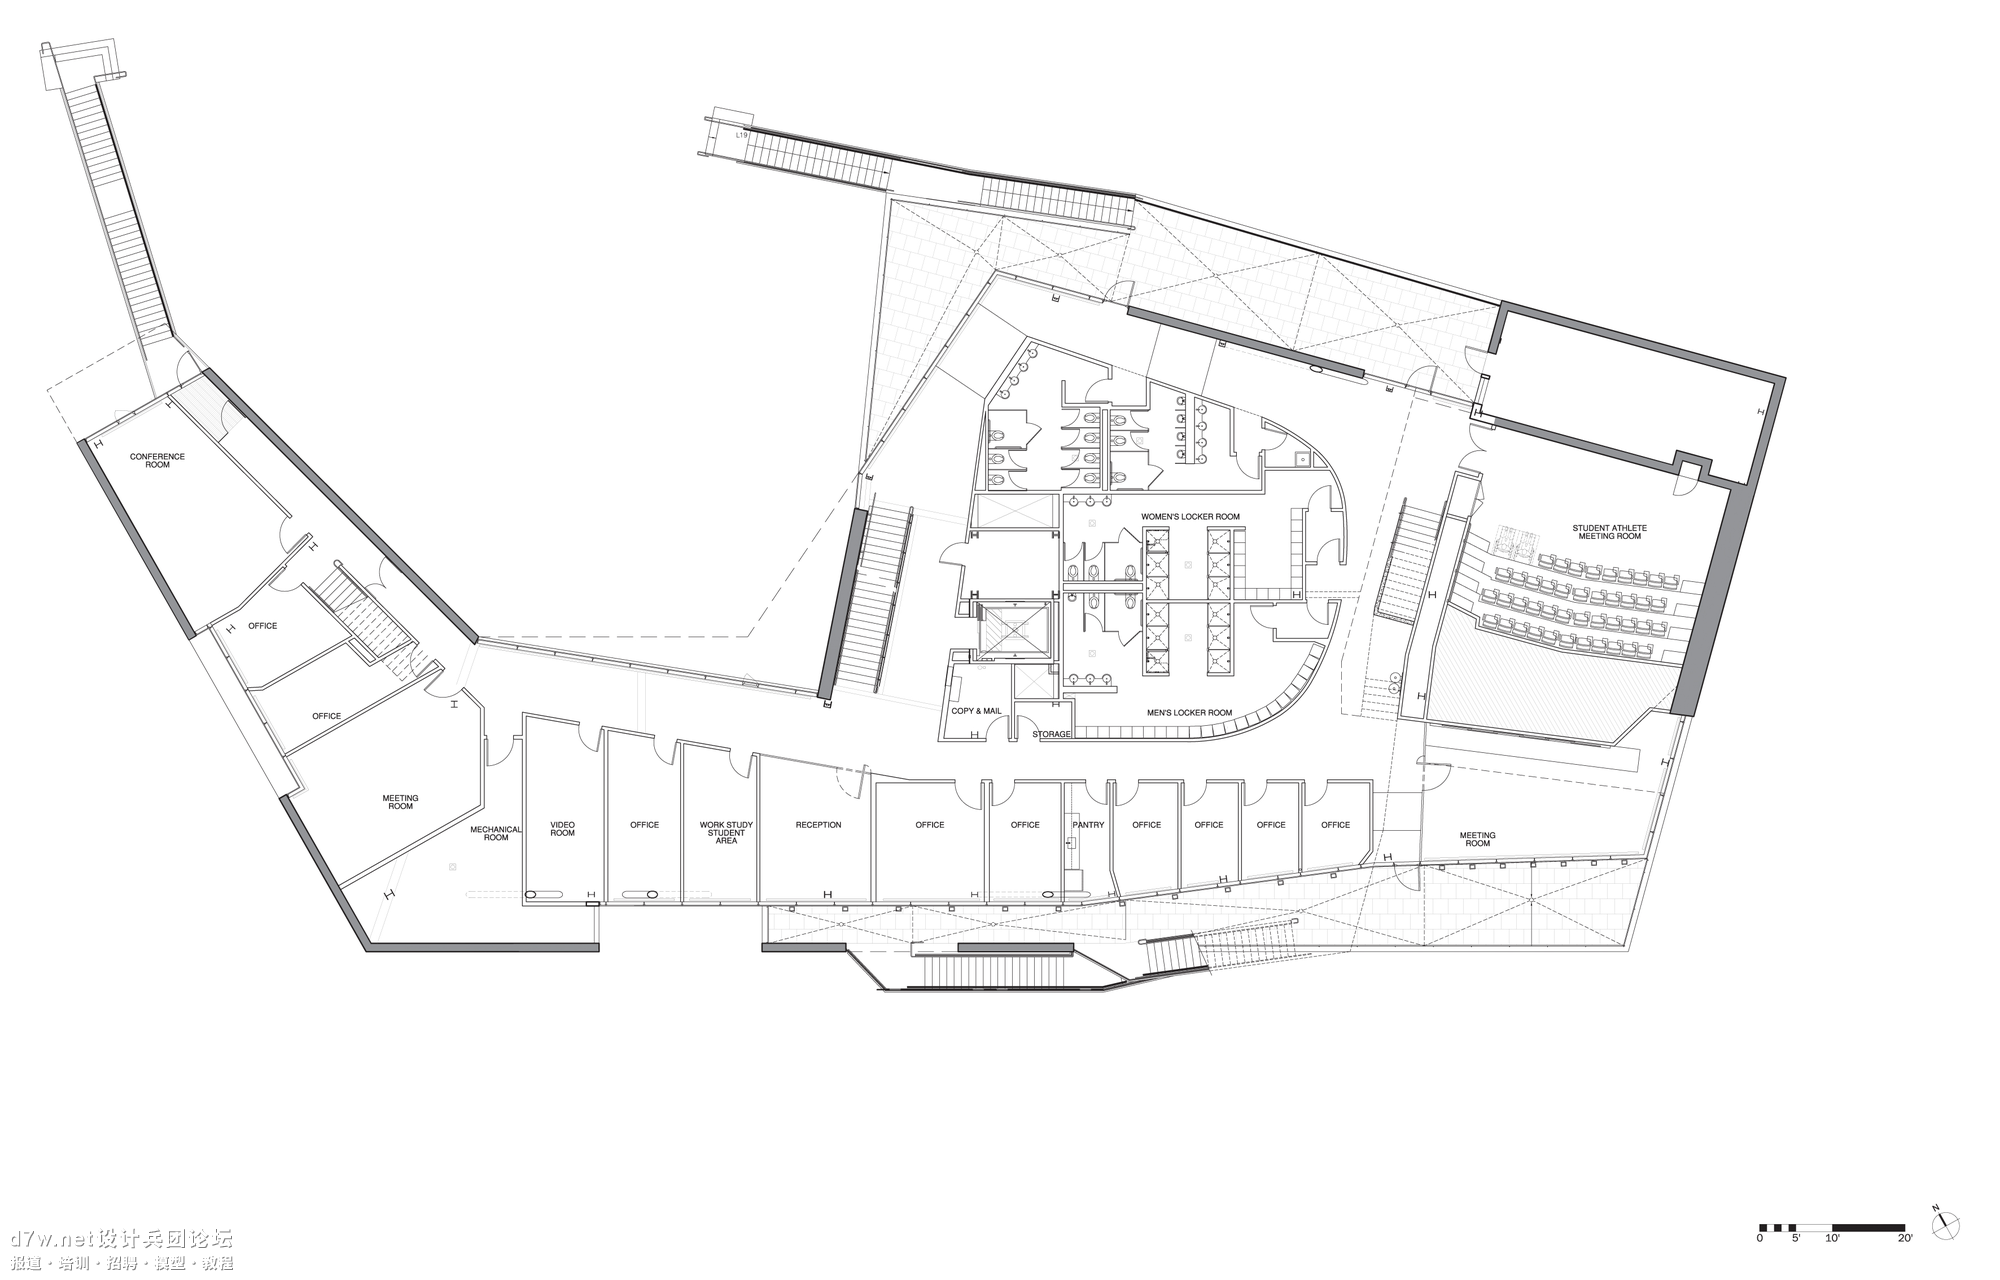 518bcf7ab3fc4ba1bf00001e_campbell-sports-center-steven-holl-architects_floor_04_plan.png